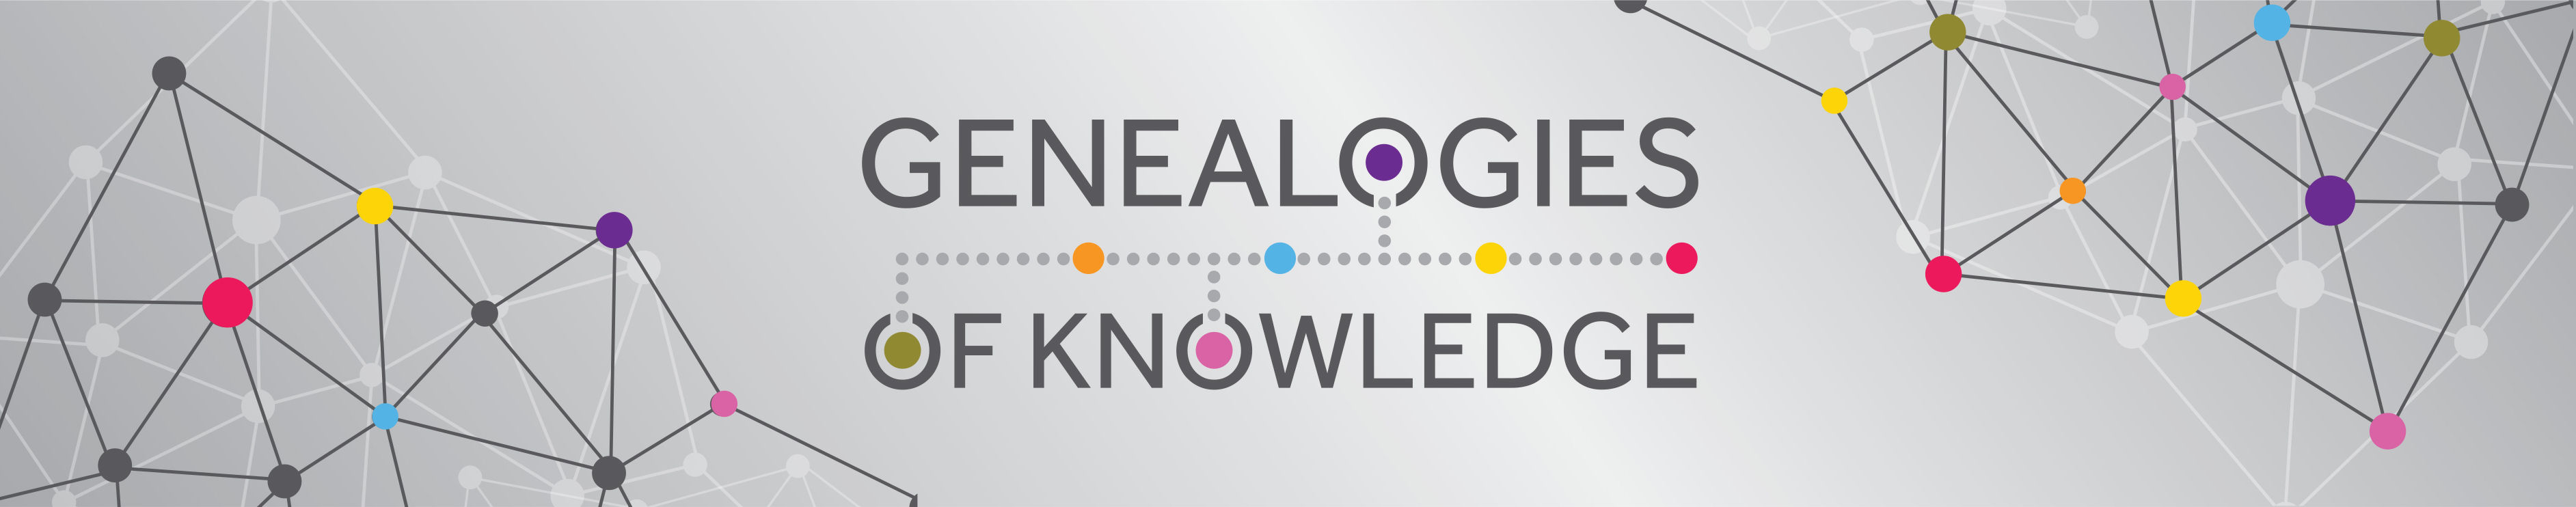 Genealogies of Knowledge I: Translating Political and Scientific Thought across Time and Space